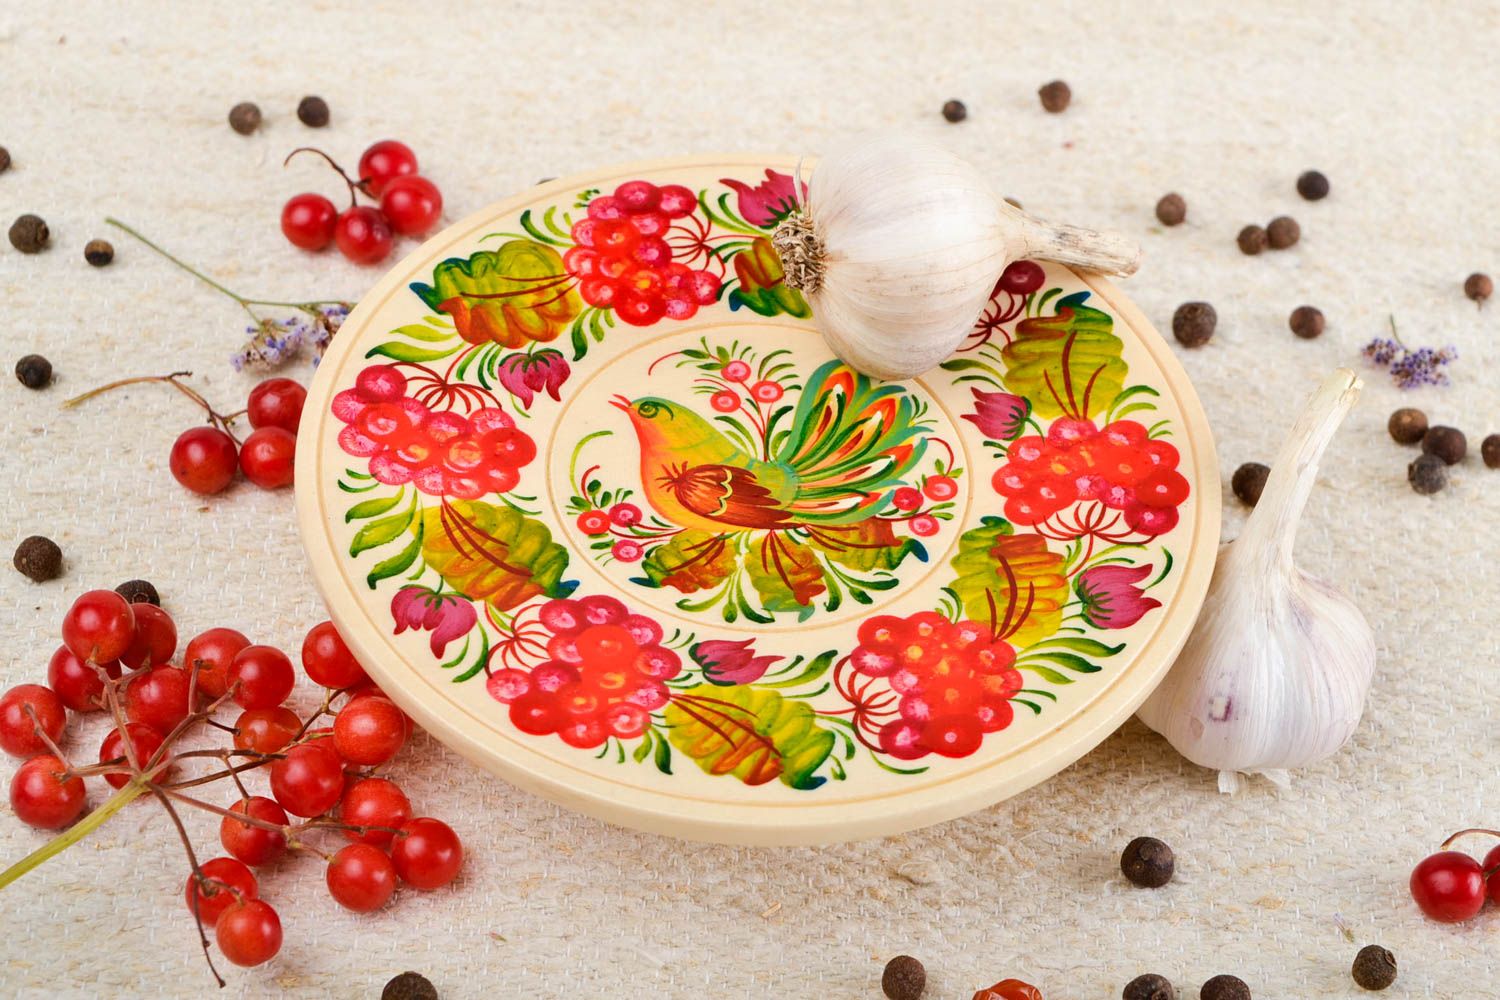 Handmade wooden plate for decorative use only folk art painted plate gift ideas photo 1